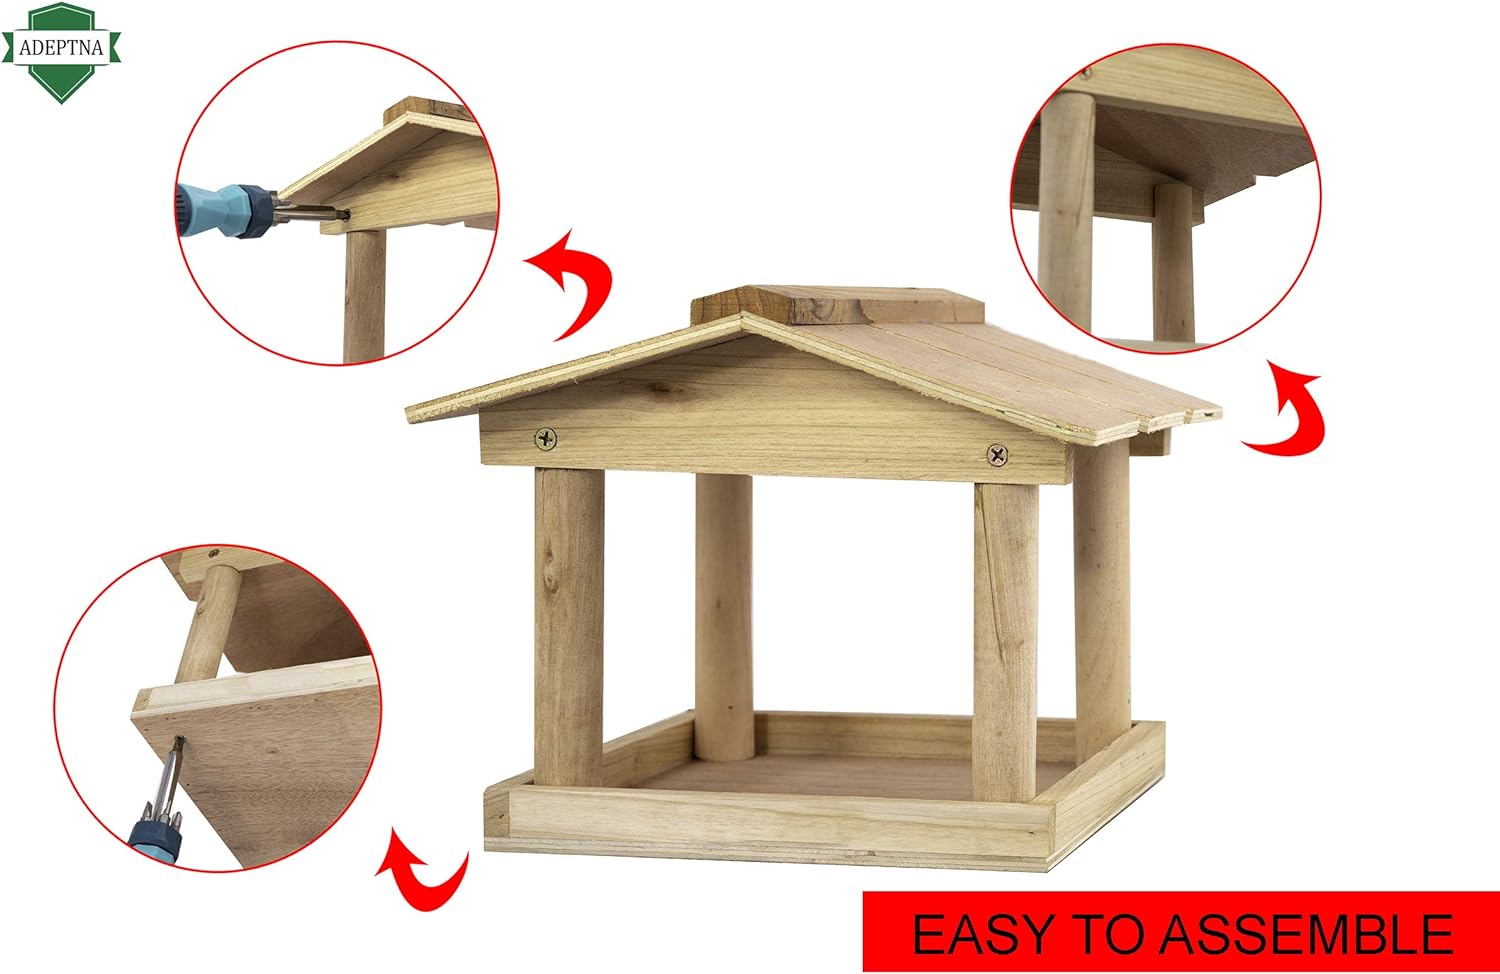 ADEPTNA Novelty Garden Wooden Tree Hanging Birds Feeder Table Seed Feeding Station – Attracts a Wide Variety of Birds